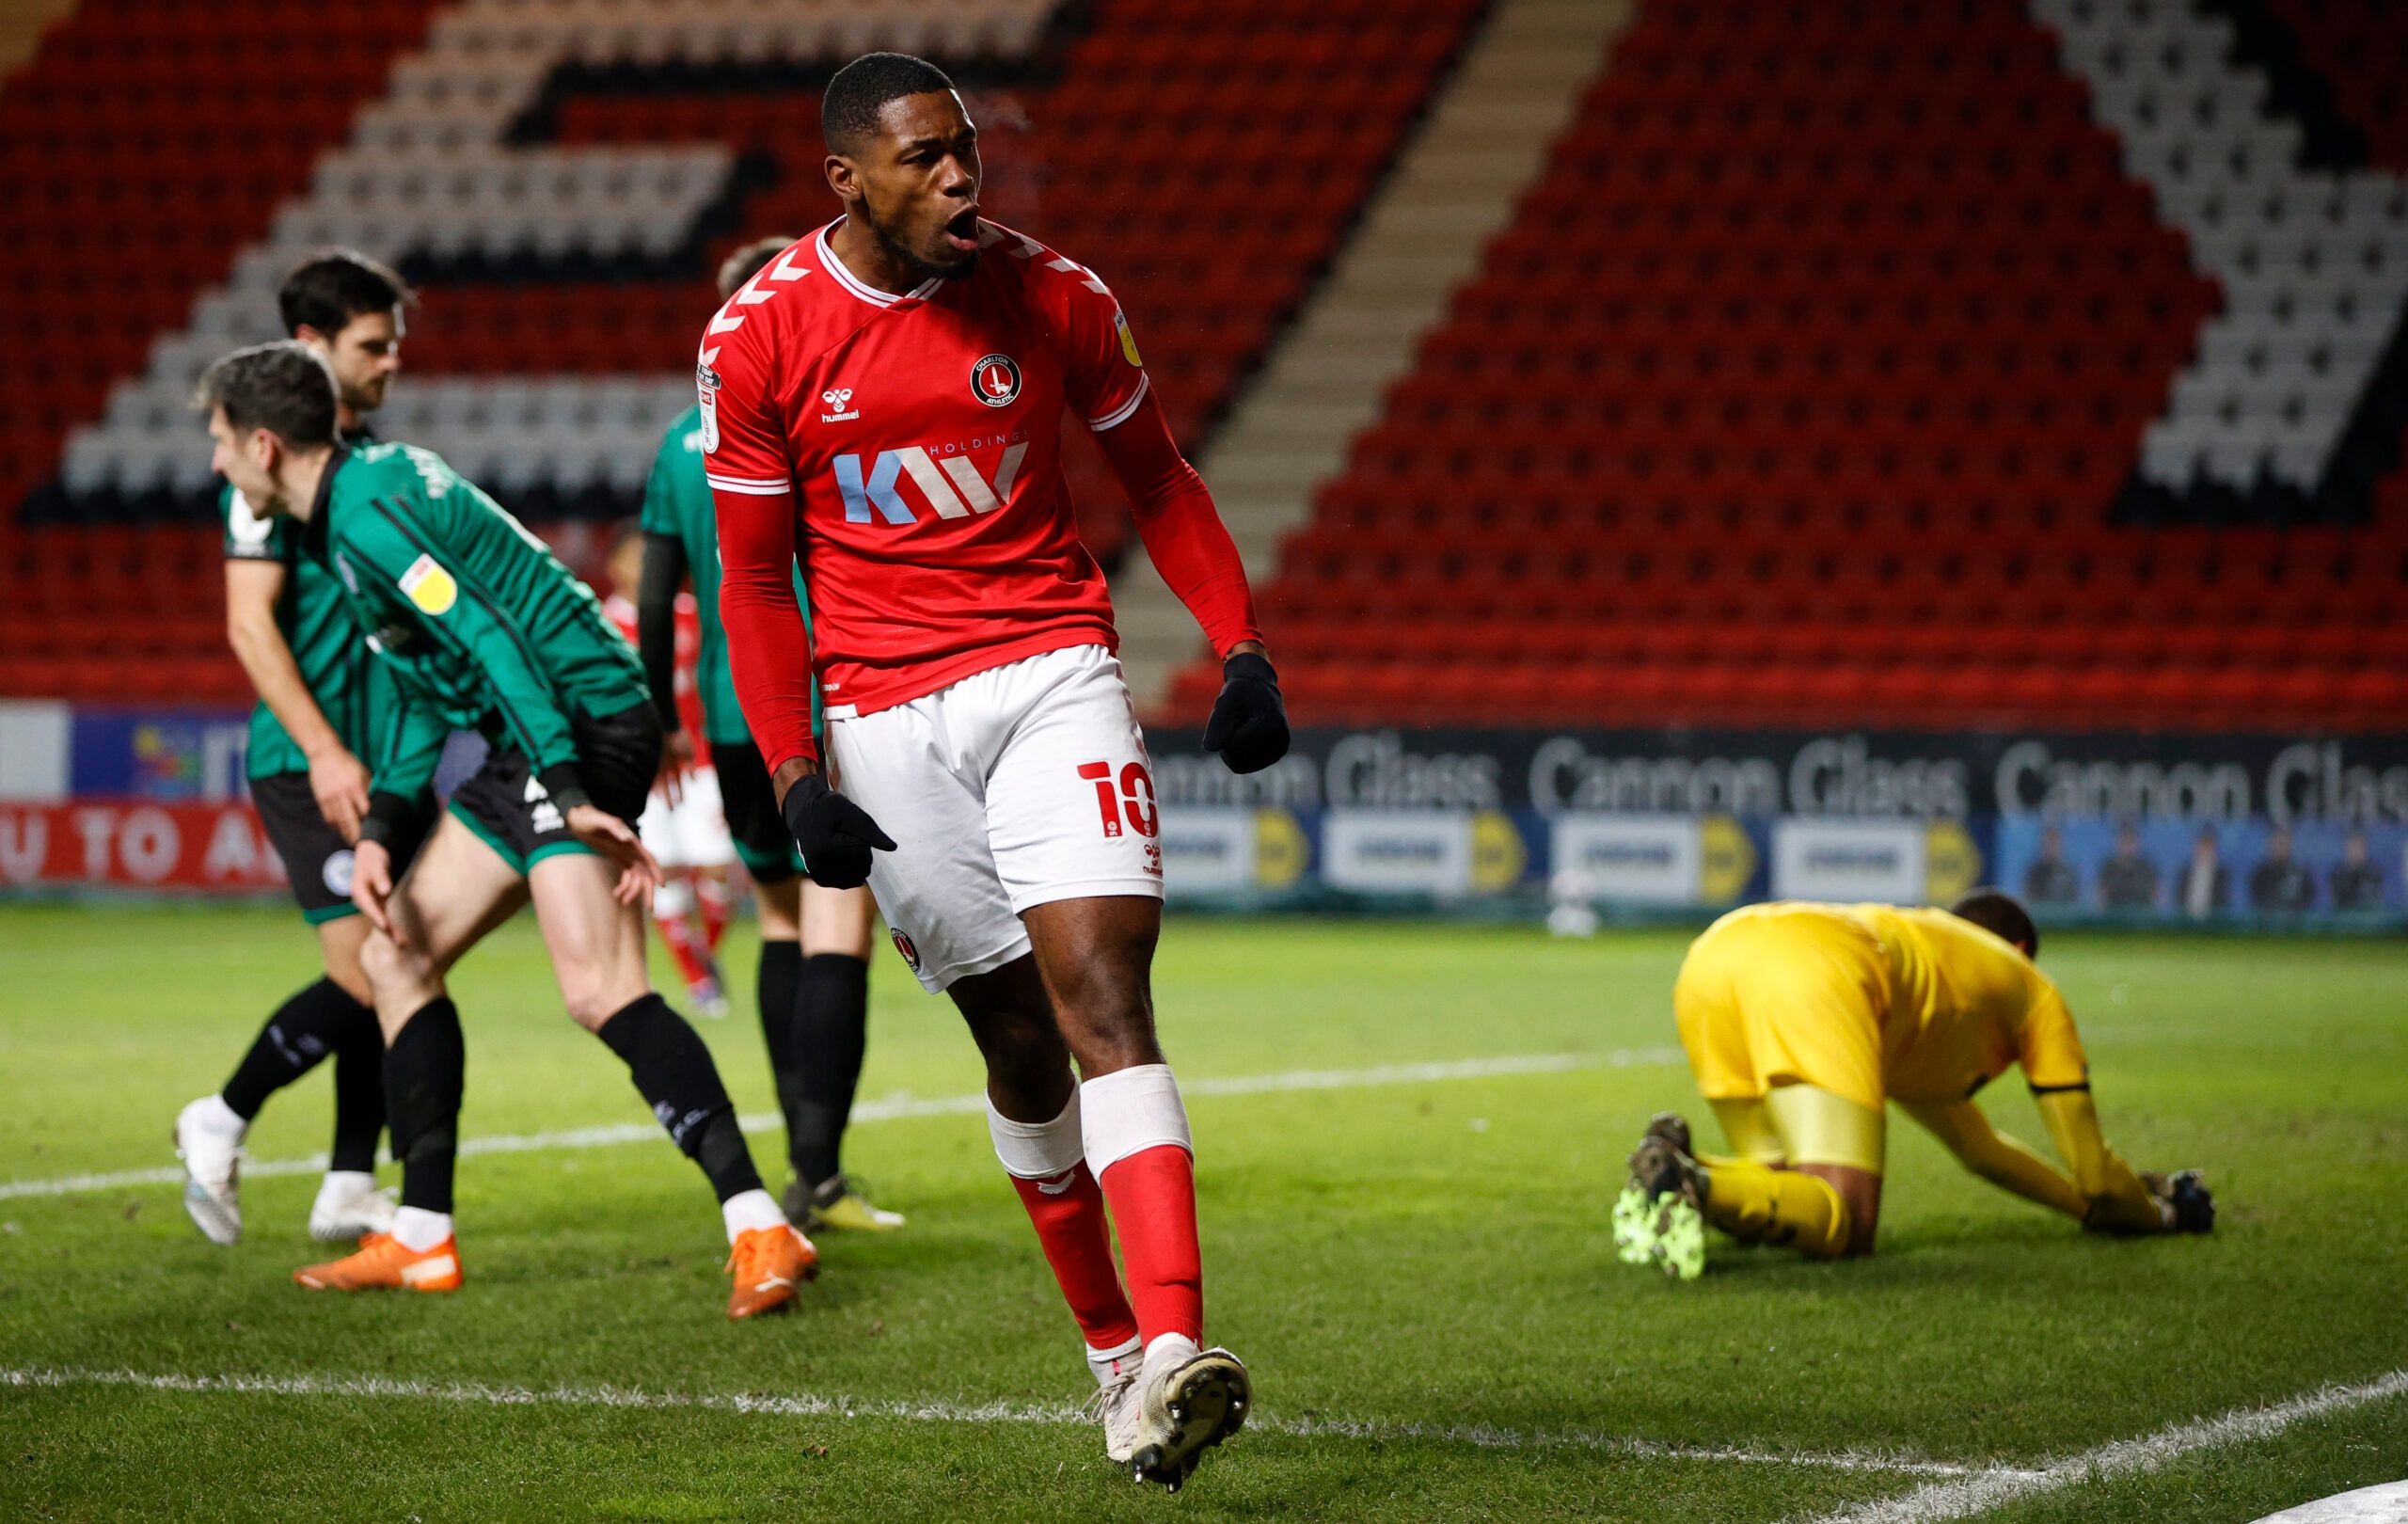 Soccer Football - League One - Charlton Athletic v Rochdale - The Valley, London, Britain - January 12, 2021 Charlton Athletic’s Chuks Aneke celebrates scoring their first goal Action Images/John Sibley